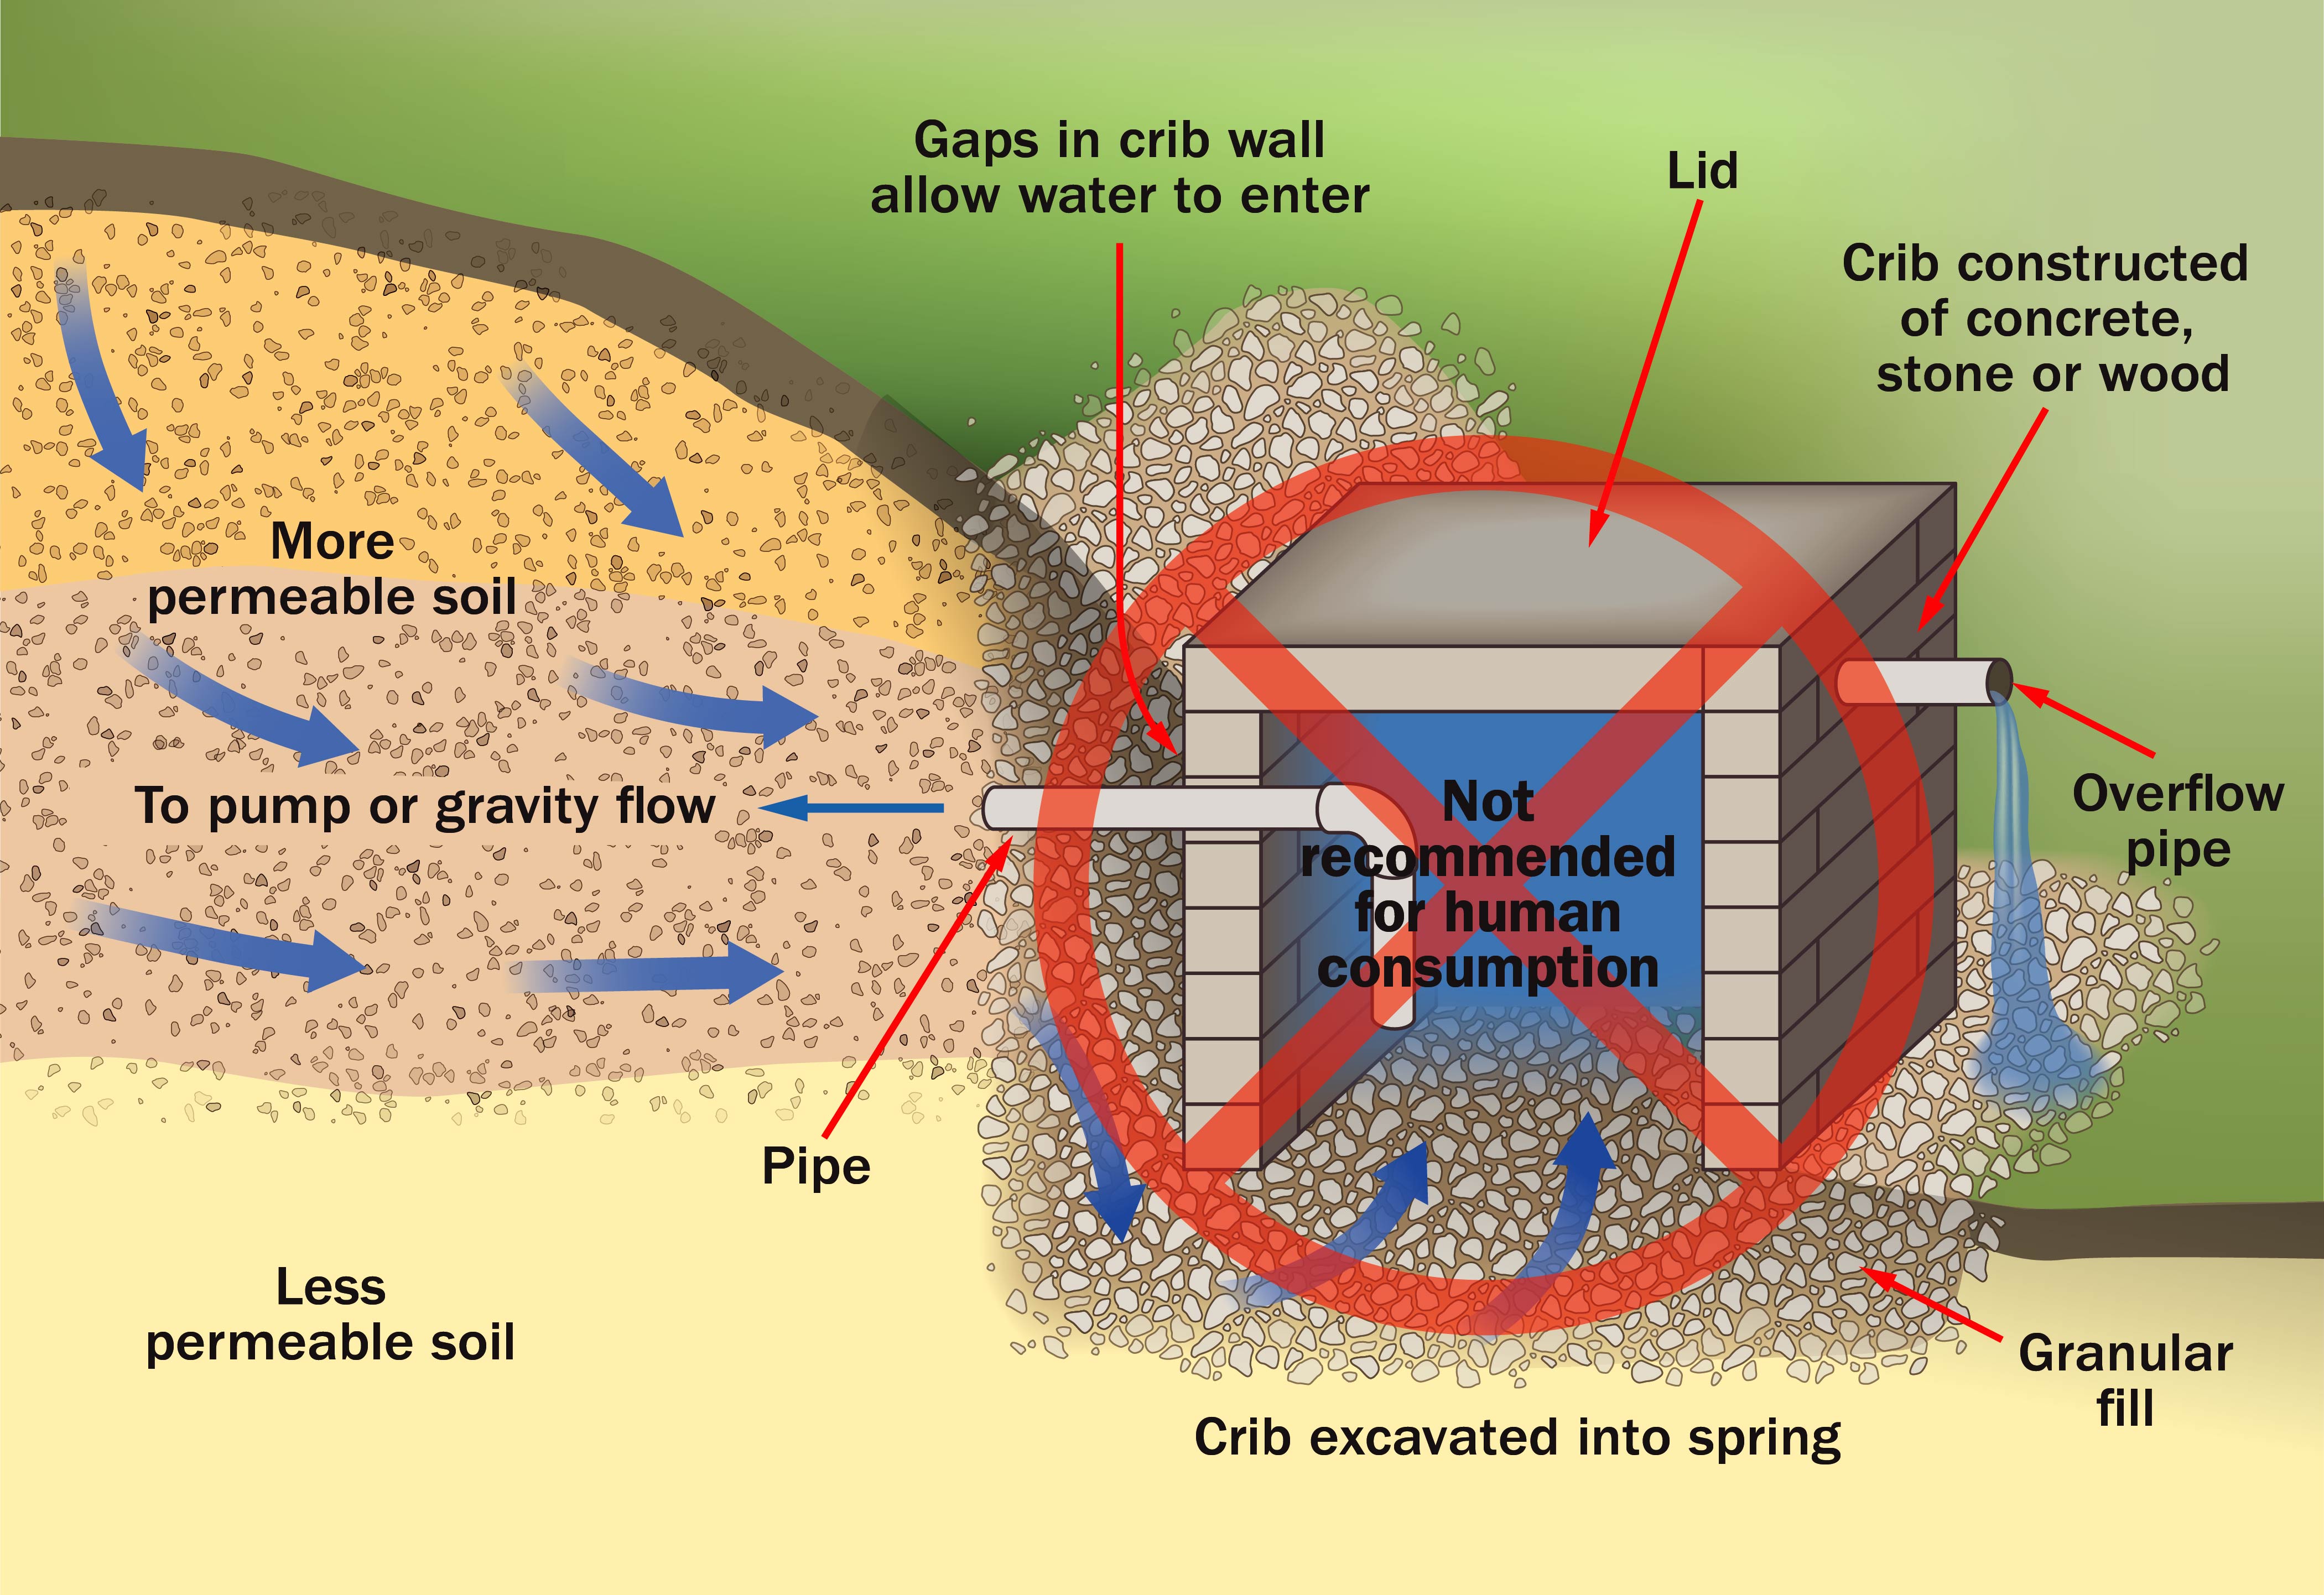 A cross-section of a spring and spring box. The spring and spring box are vulnerable to contamination because contaminated surface water can enter freely.